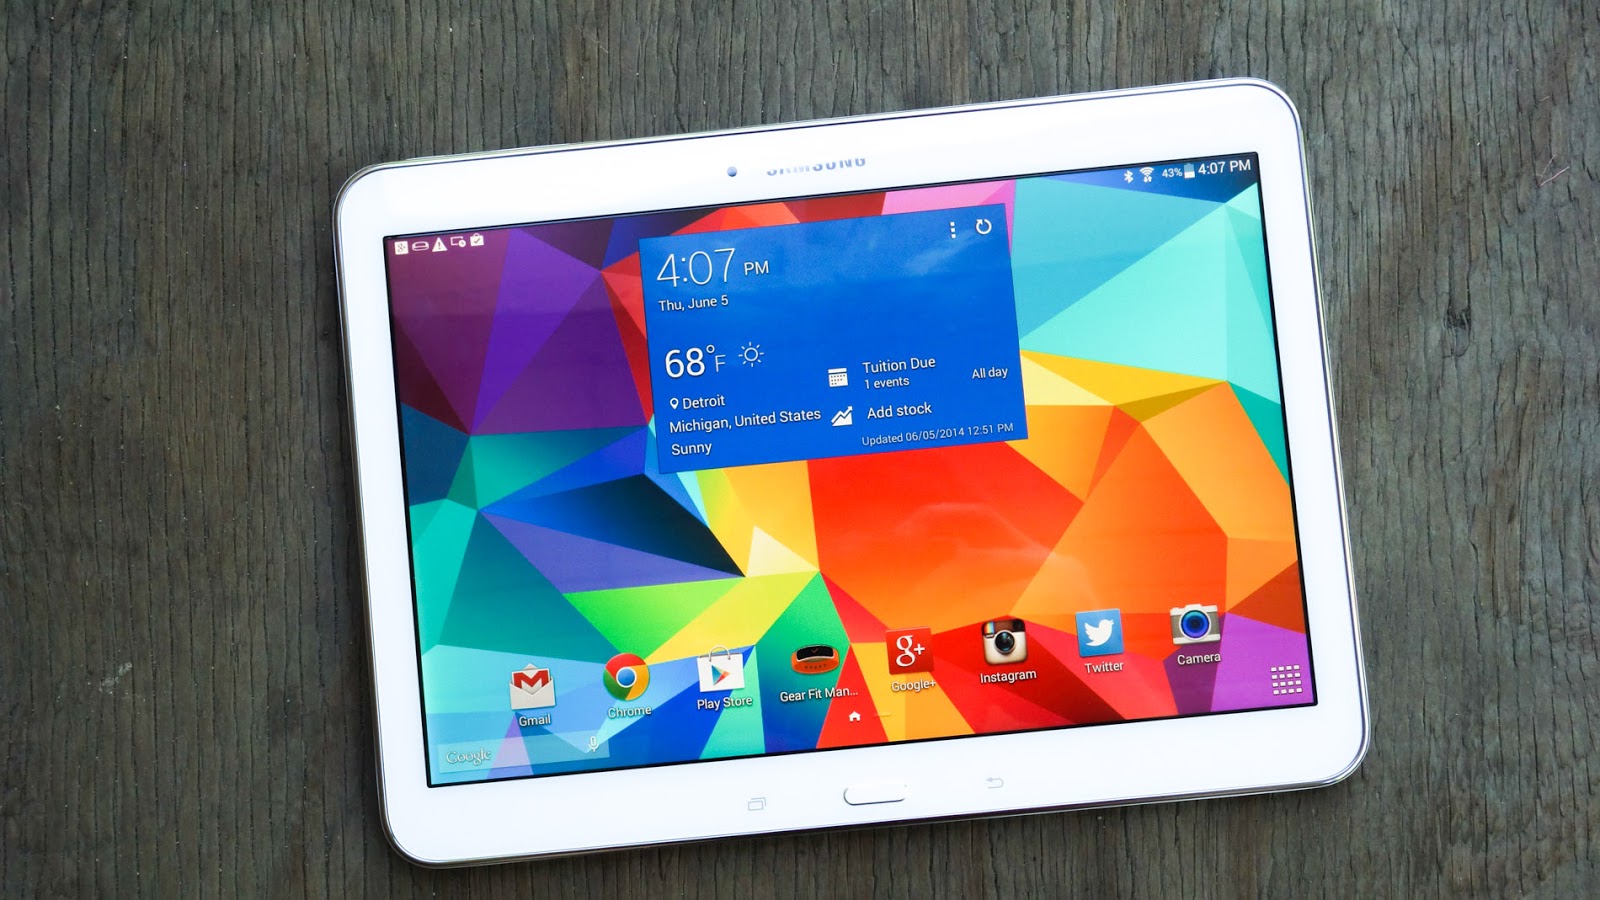 How to Update Galaxy Tab4 10.1 WiFi SM-T530 to Nougat 7.0 CM14